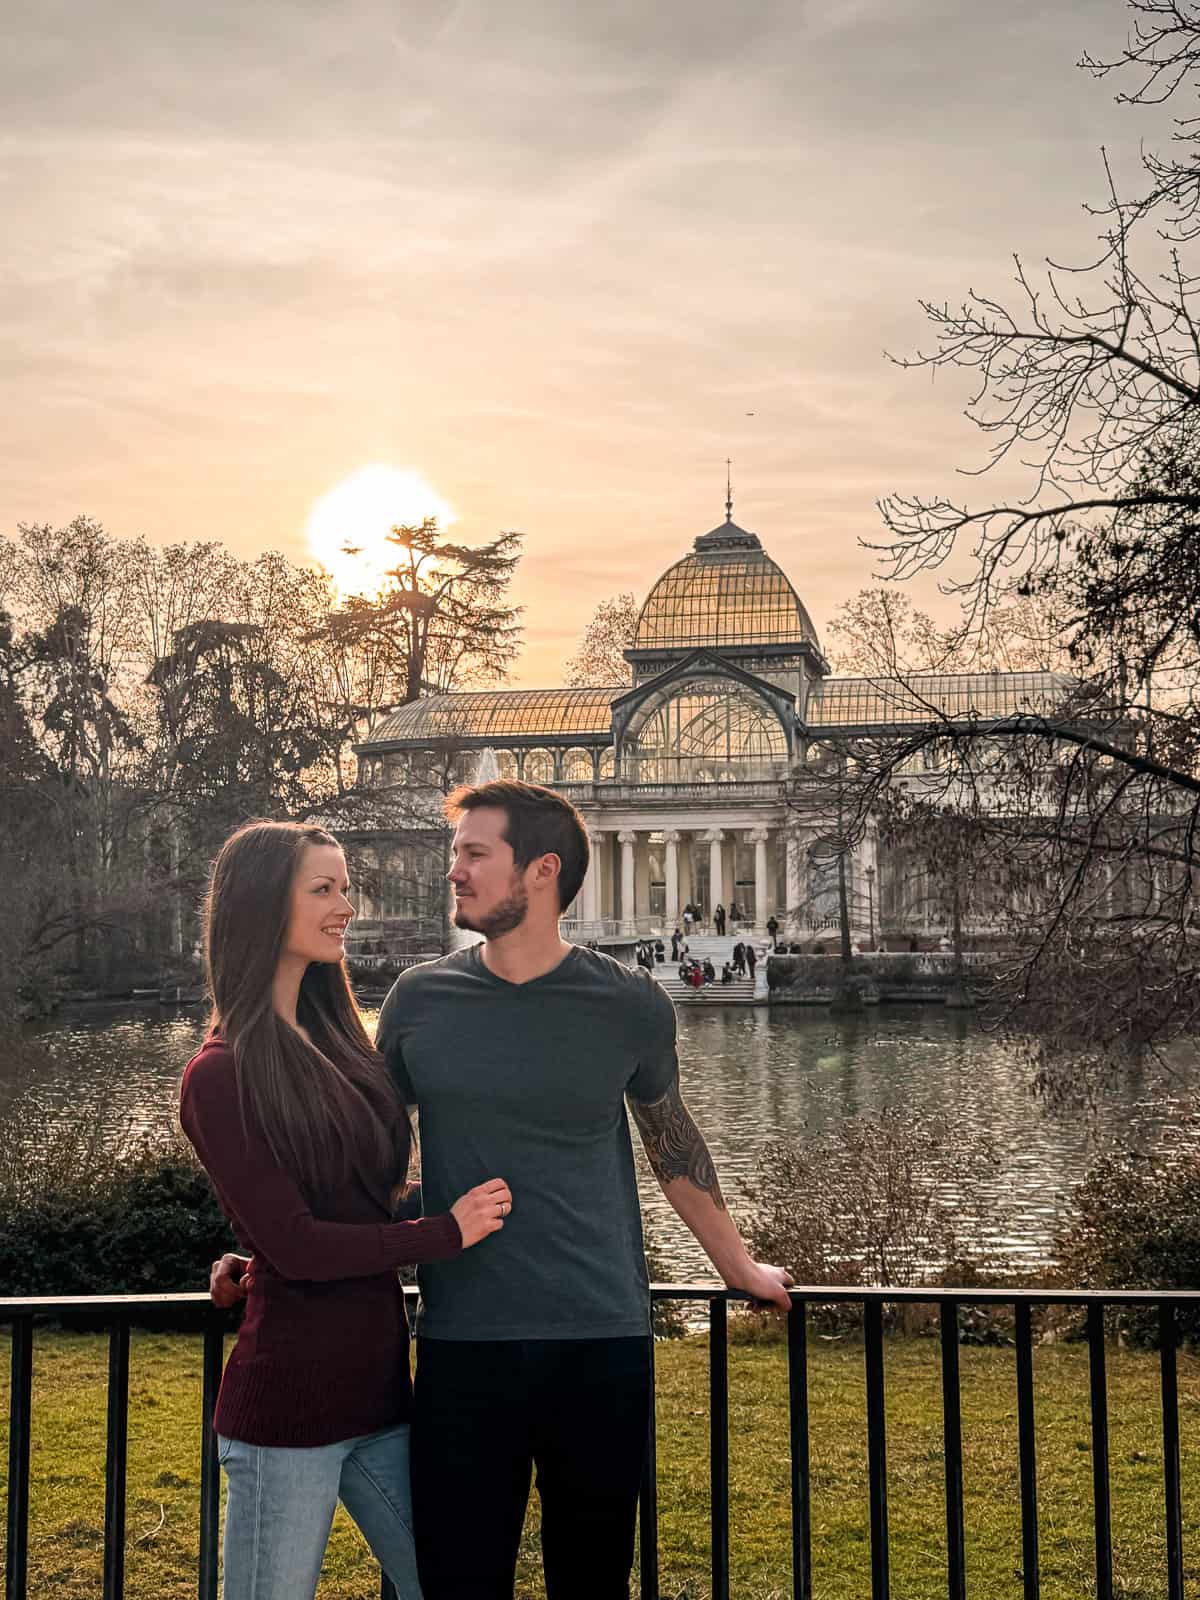 A couple stands in a loving embrace before the Crystal Palace in Madrid's Retiro Park, with the sun setting behind the glass structure, reflecting a golden hue over the peaceful scene.